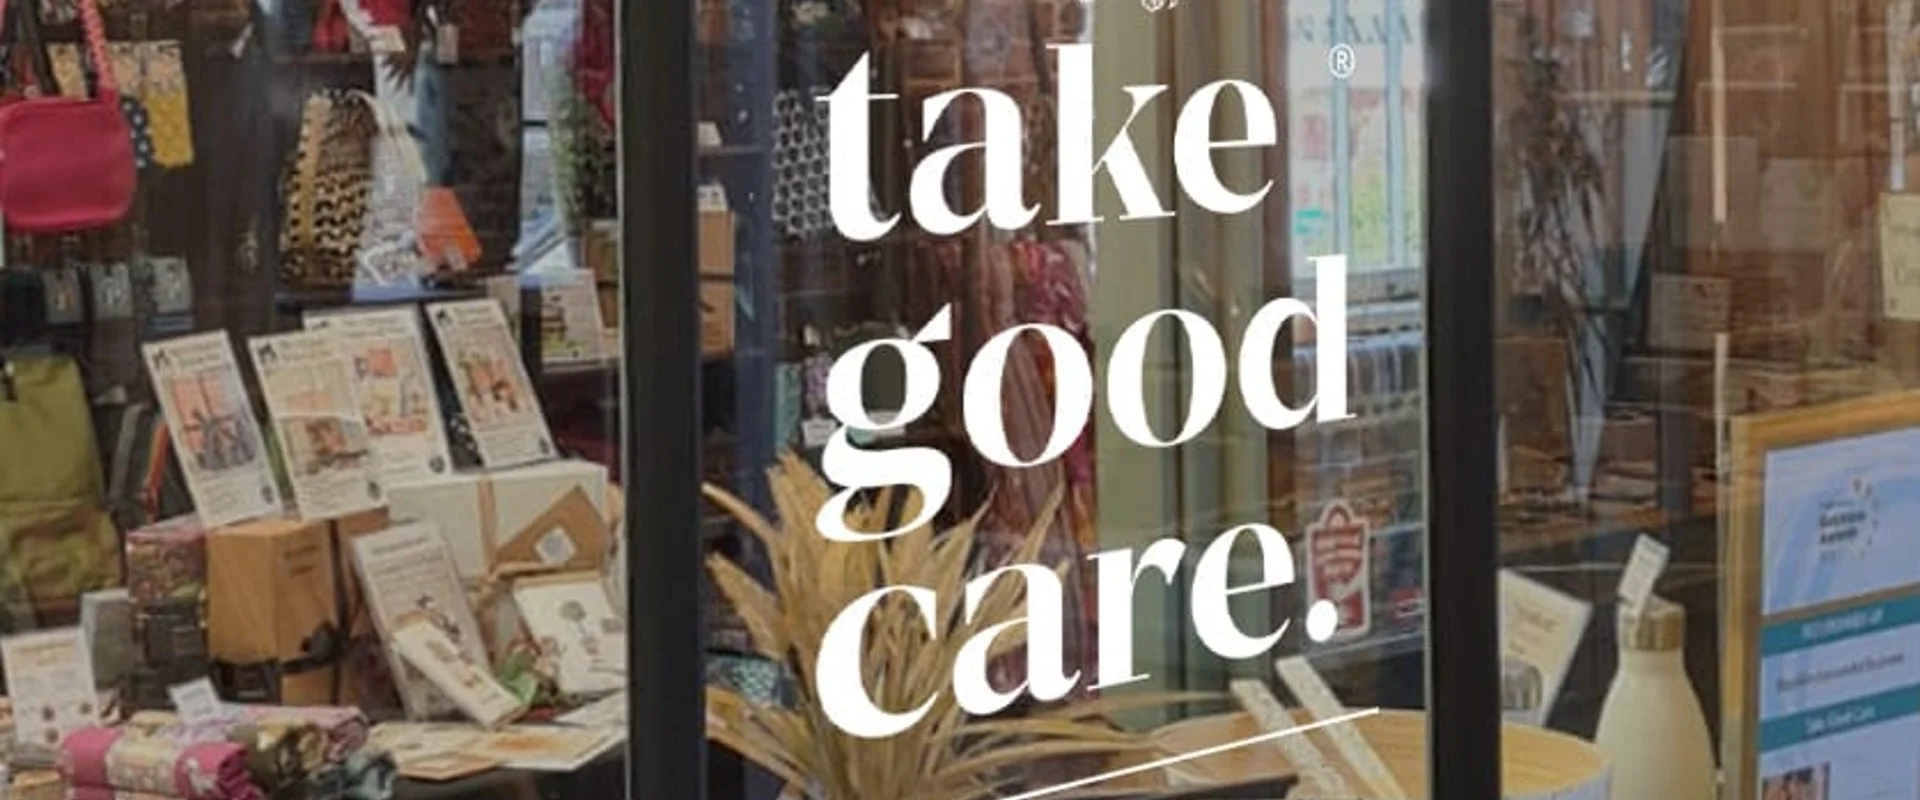 take good care eco shop in lewes